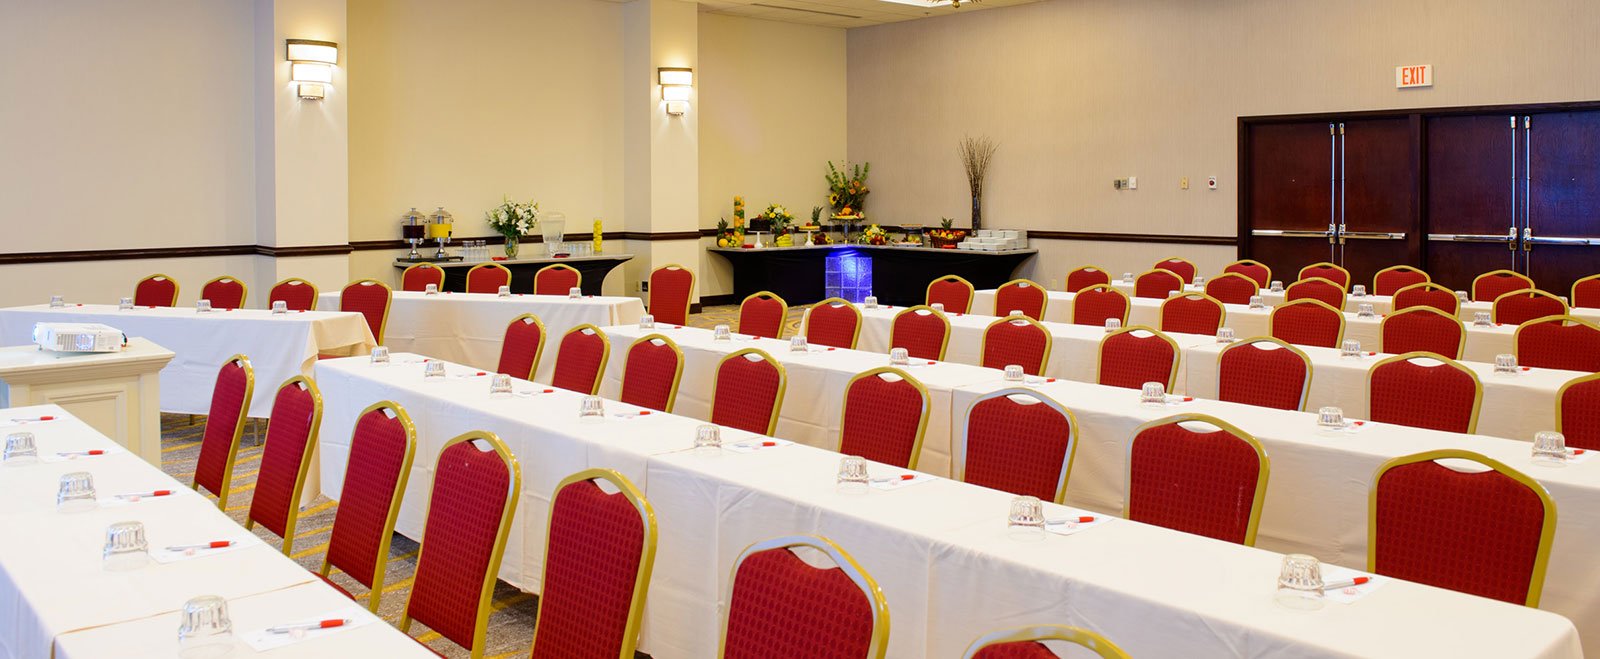 Meetings & Special Events Services by Kahler Hospitality Group Hotels